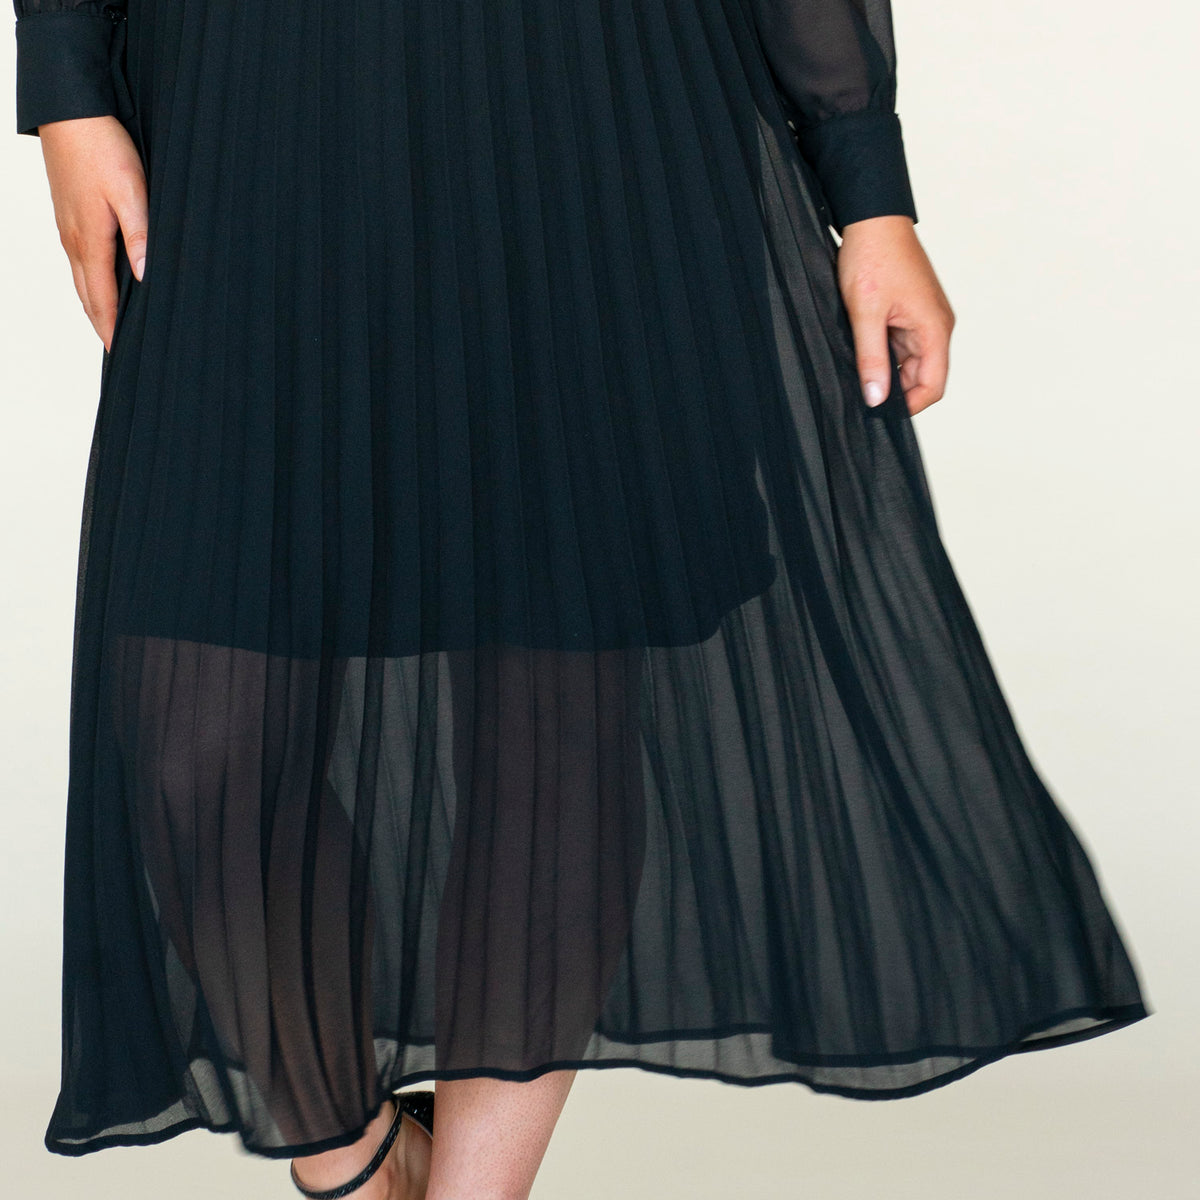 Pleated Belted Dress - Black